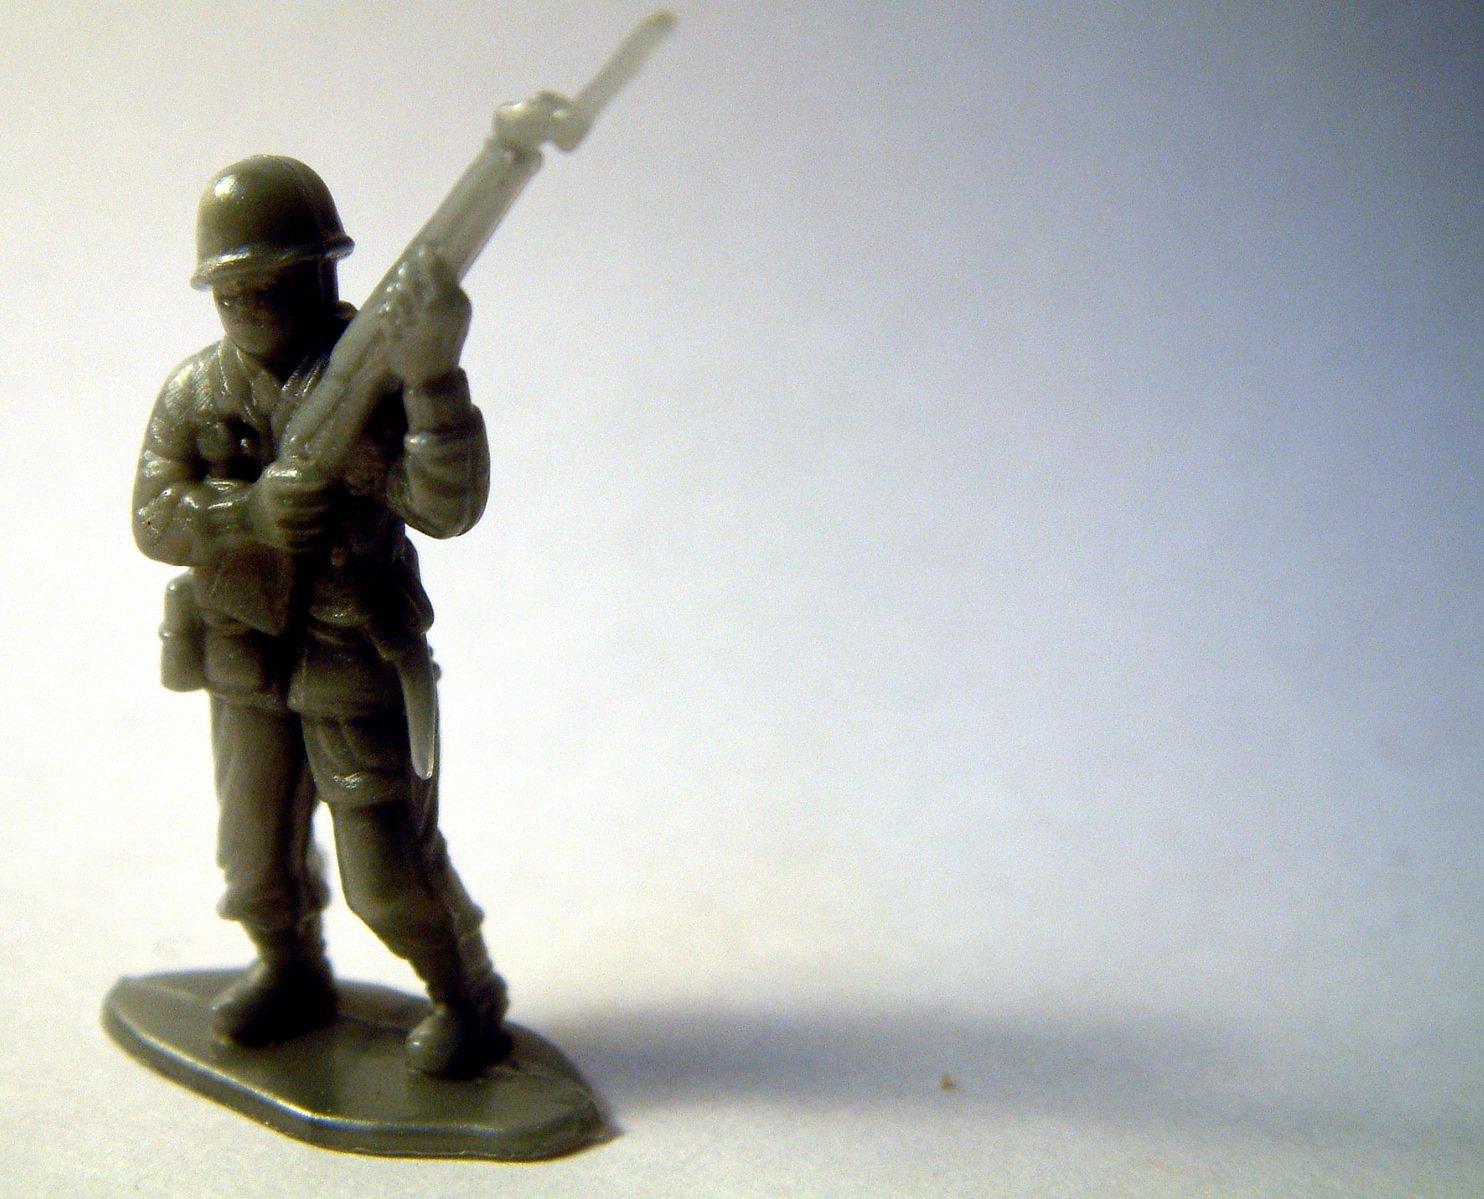 a toy soldier is holding a weapon on a base